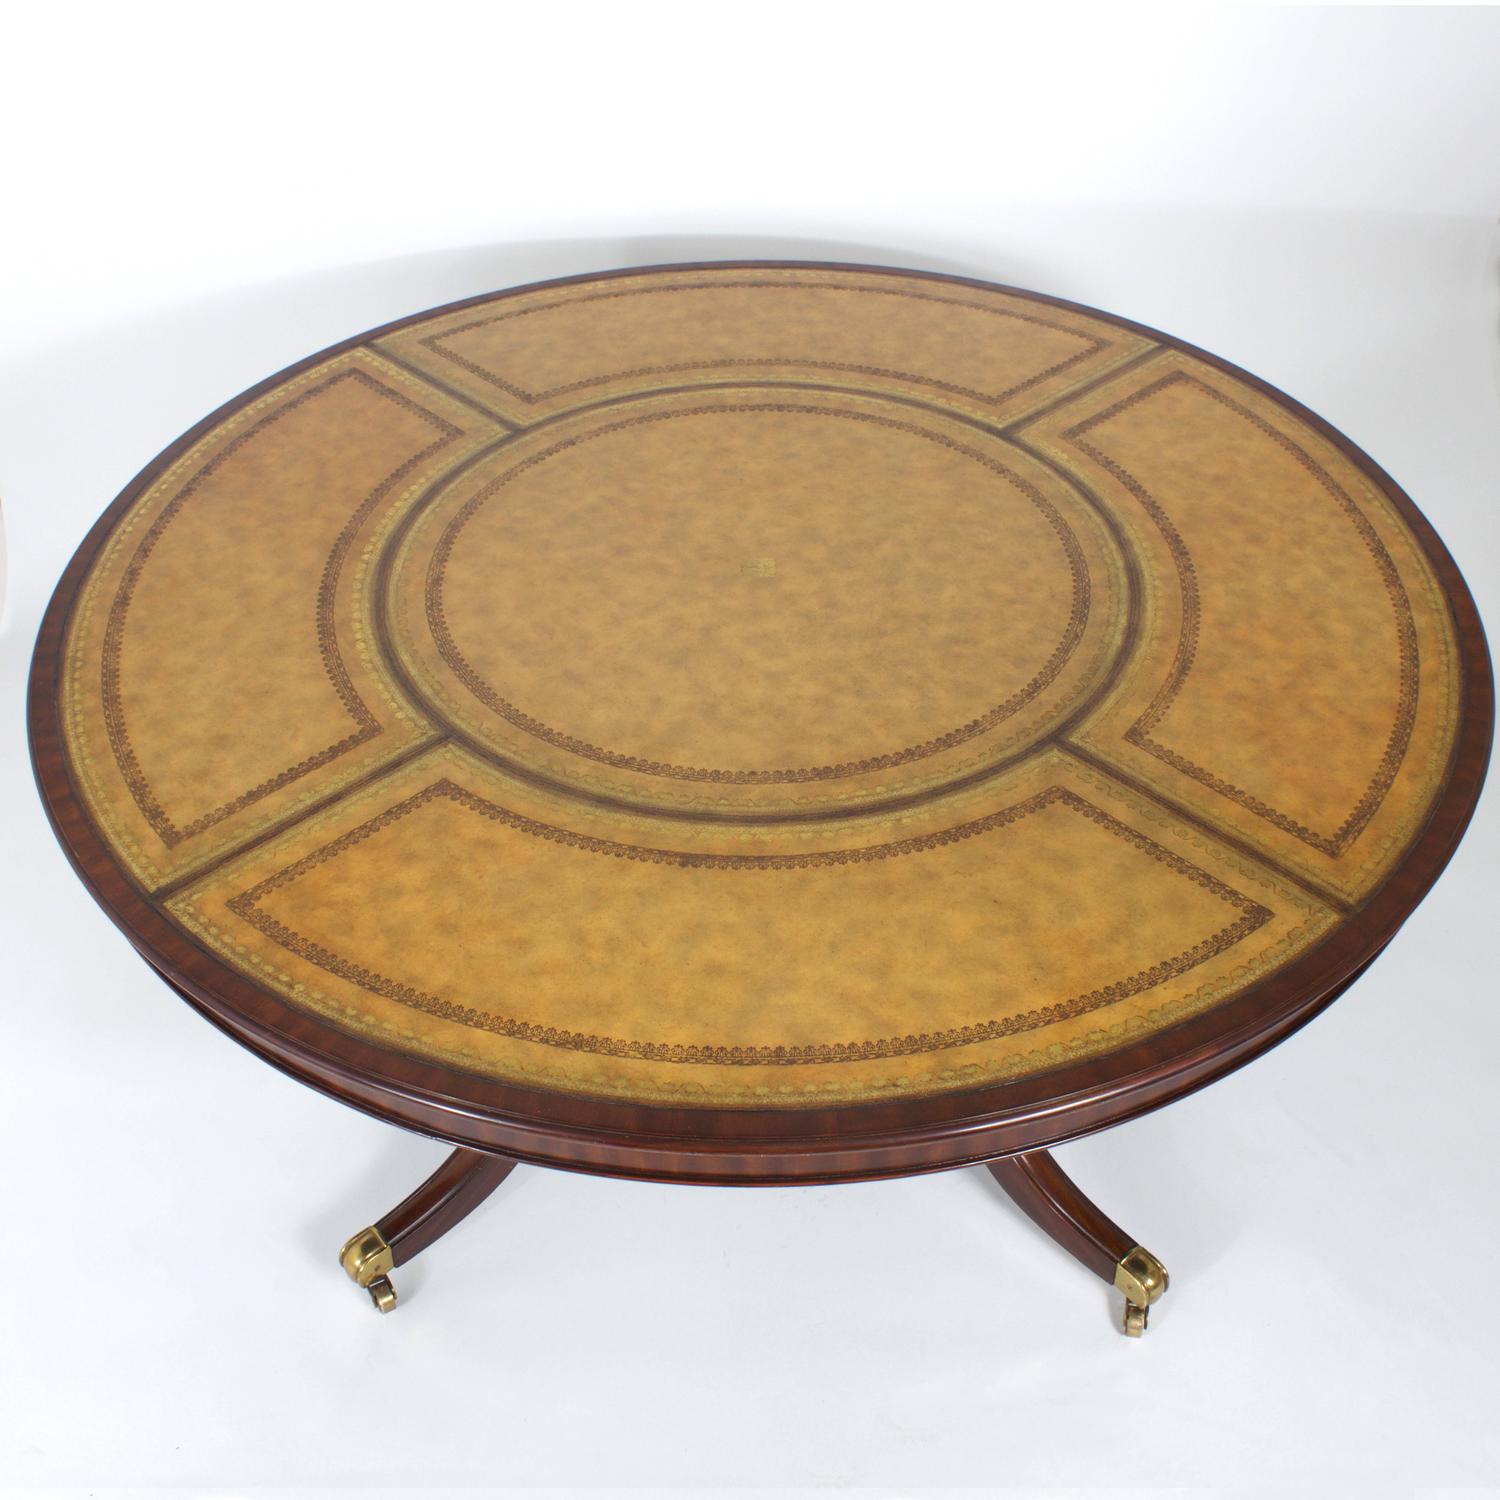 Maitland-Smith Leather Top Round Table For Sale at 1stdibs